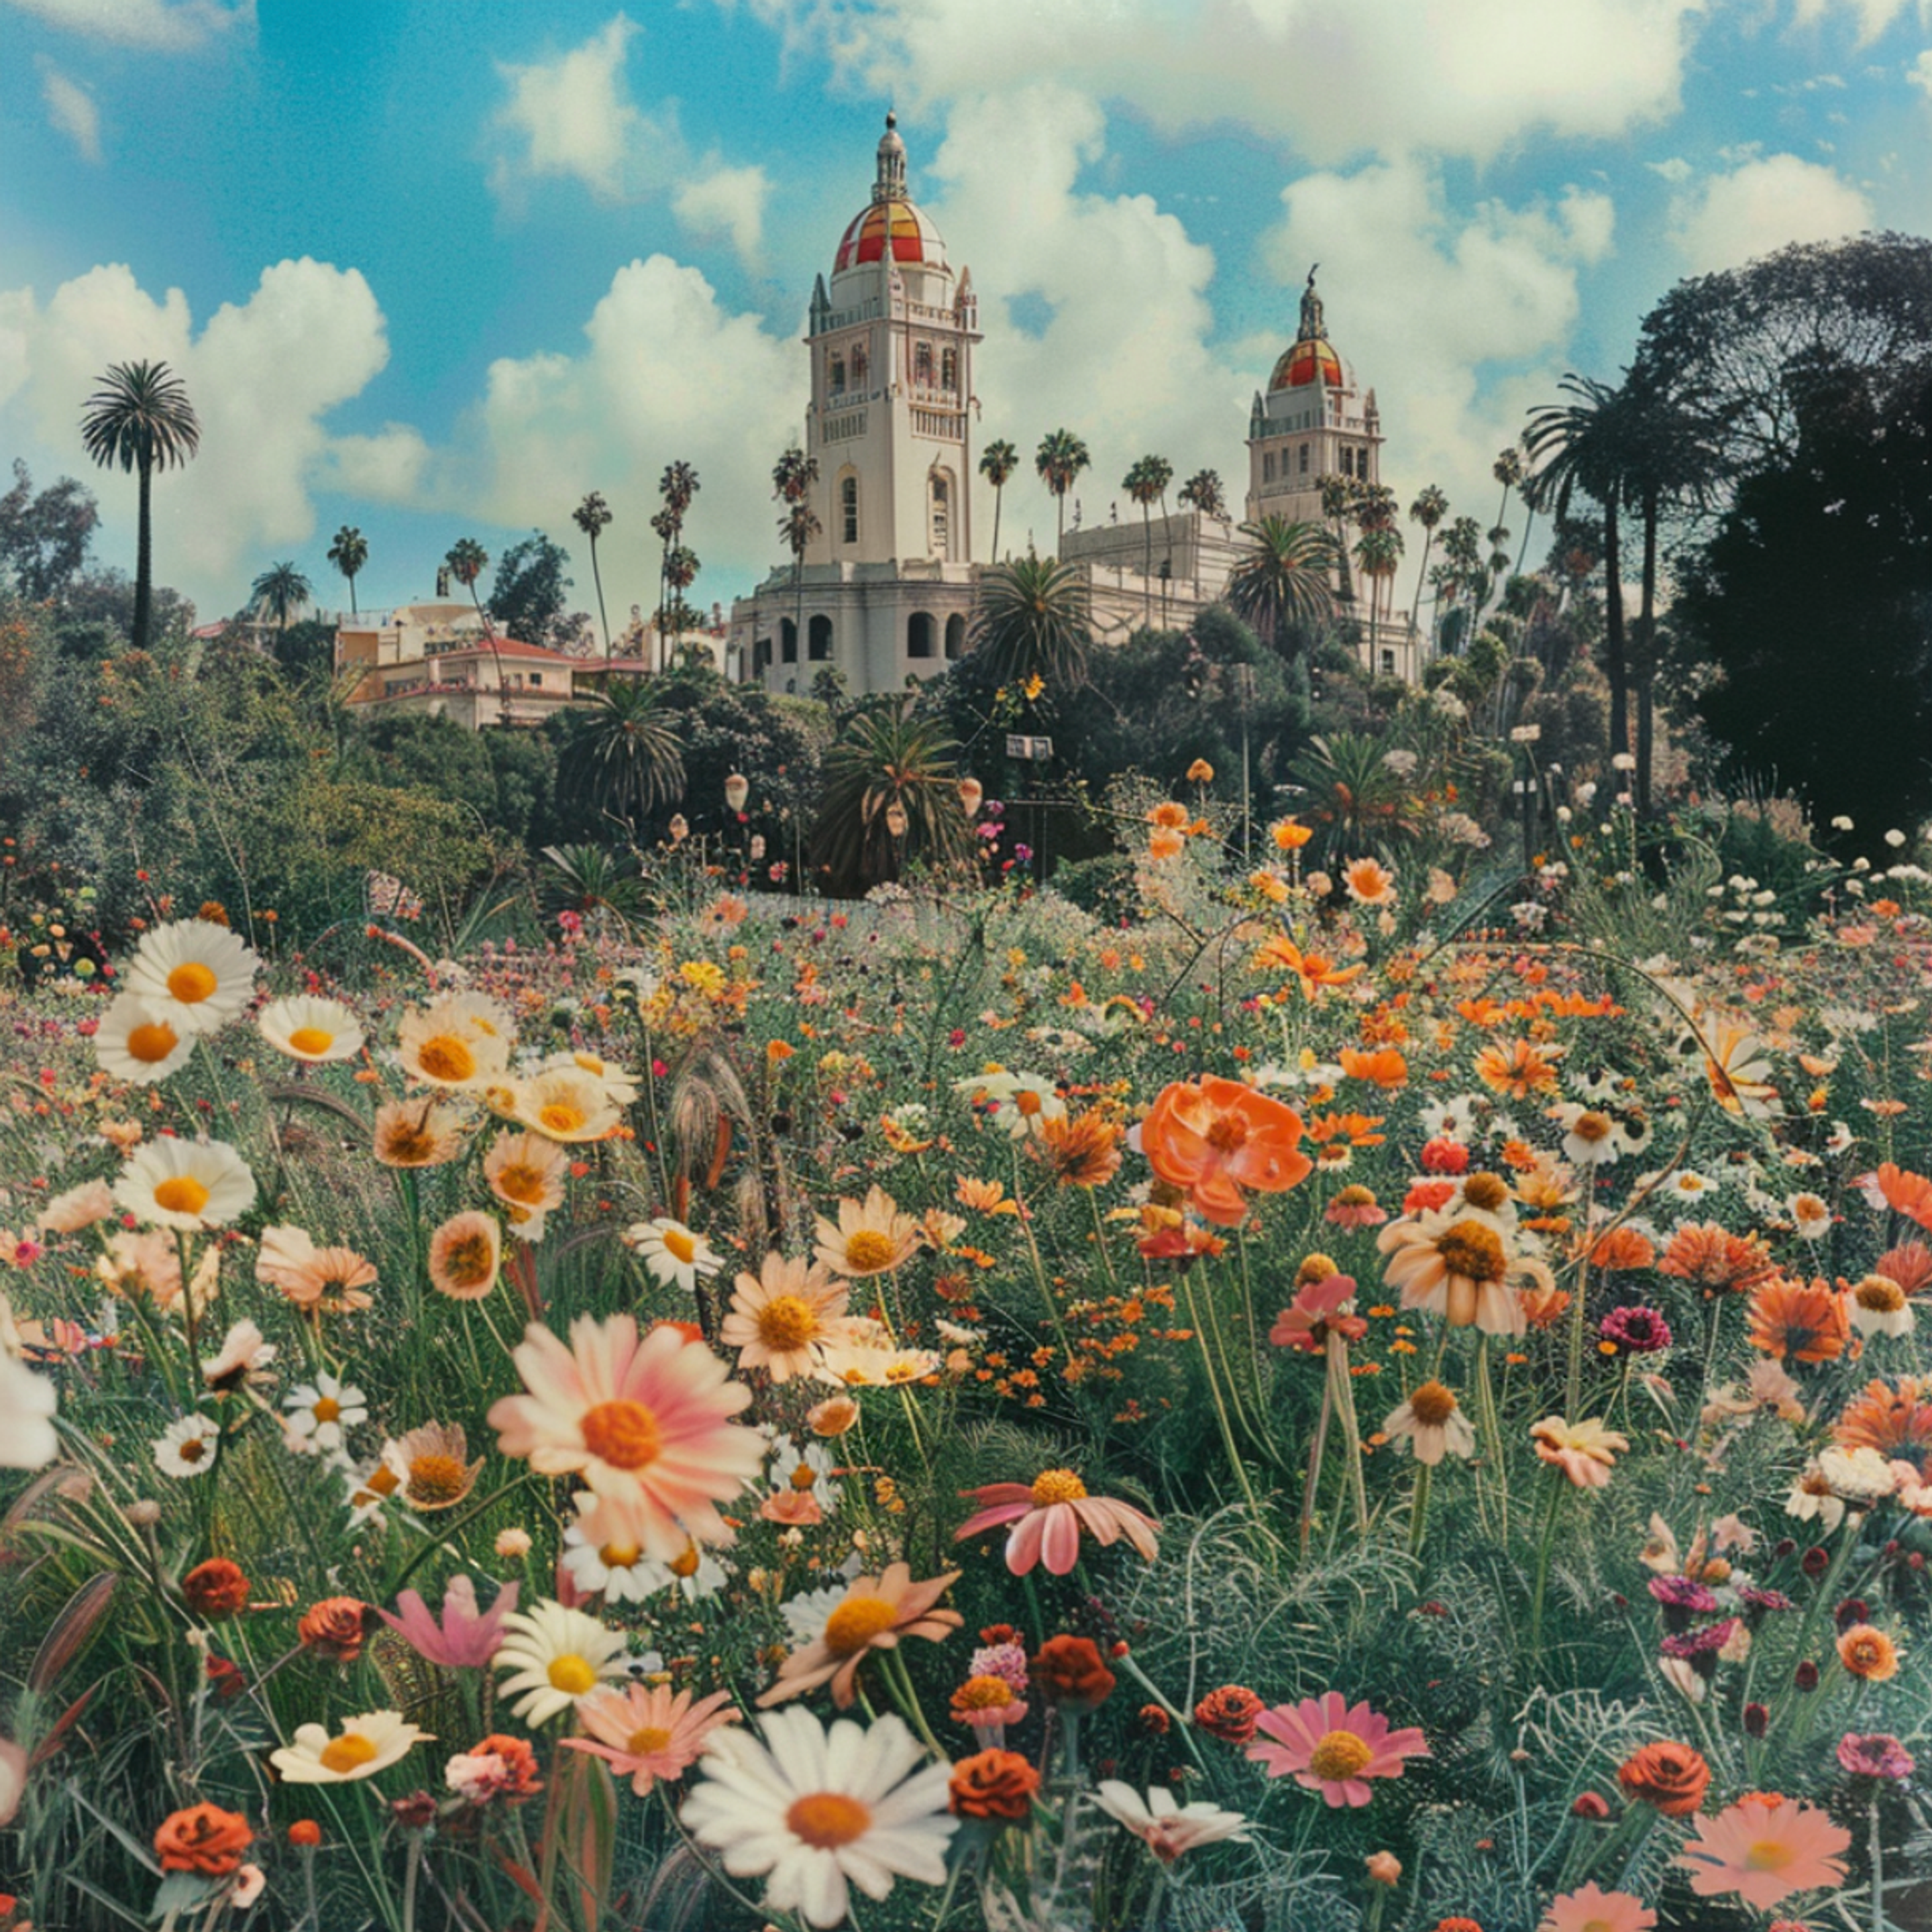 A vibrant field of wildflowers in full bloom with the iconic architecture of the towers of Balboa Park in the background, embodying San Diego’s natural splendor and the city's love for fresh flower delivery.